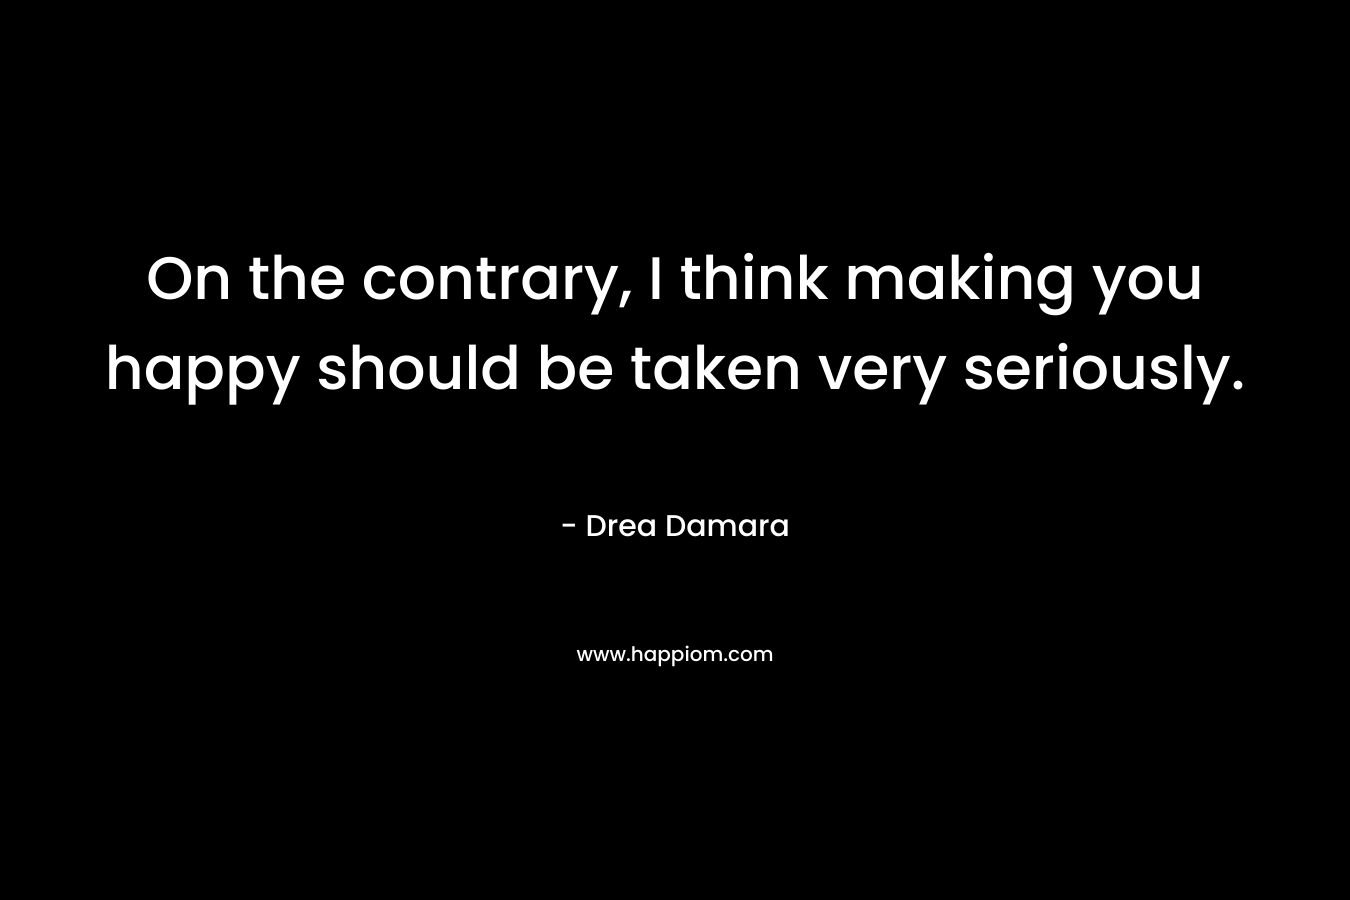 On the contrary, I think making you happy should be taken very seriously. – Drea Damara